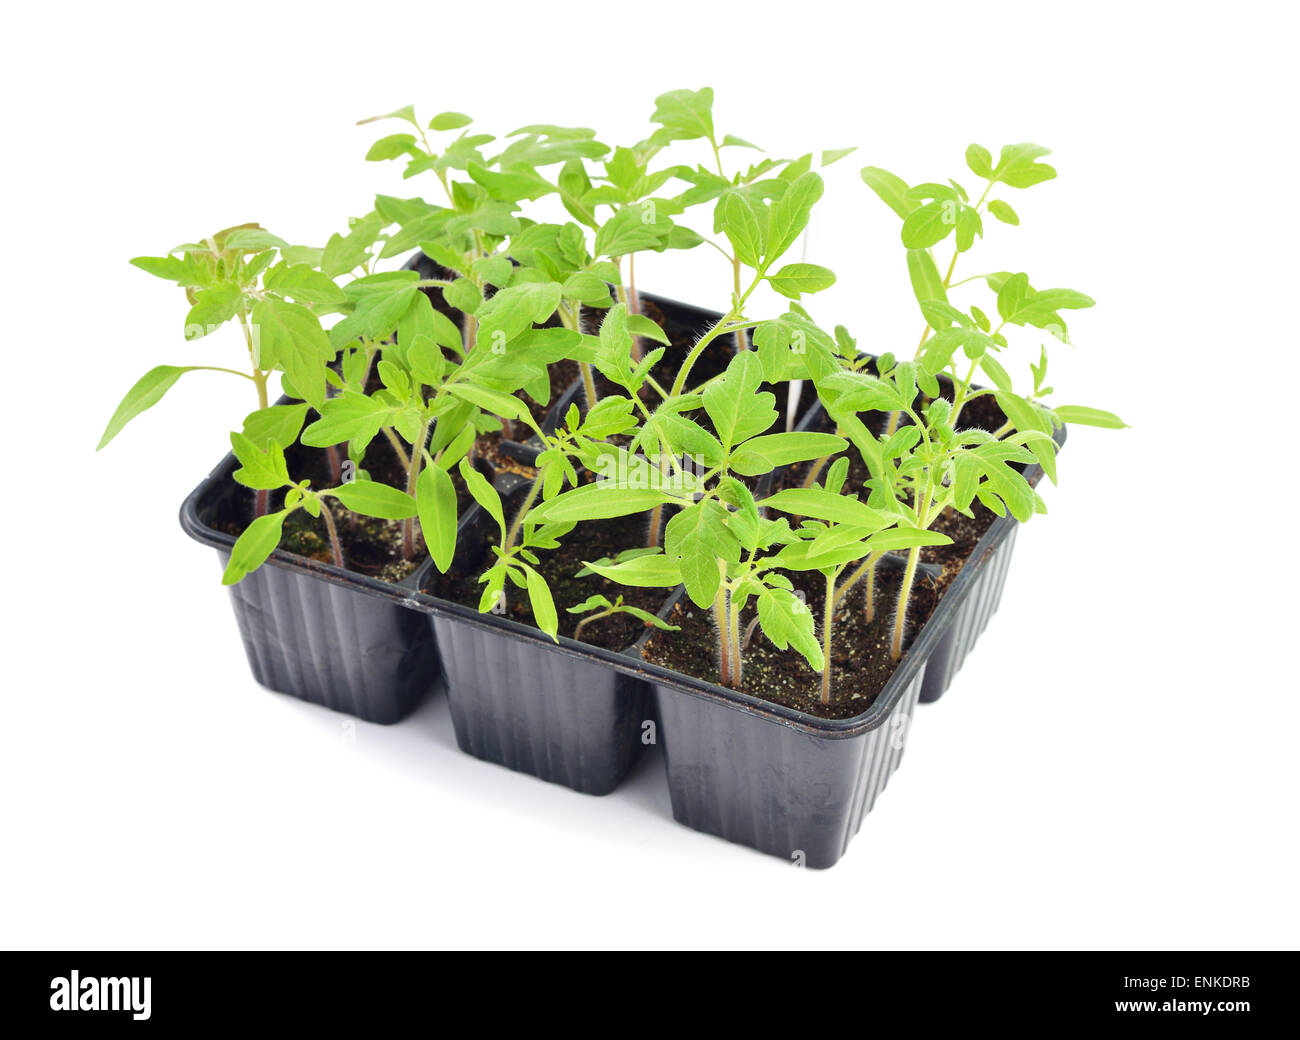 Tomato seedlings in a pot isolated on white background. Young plants in plastic cells; organic gardening Stock Photo